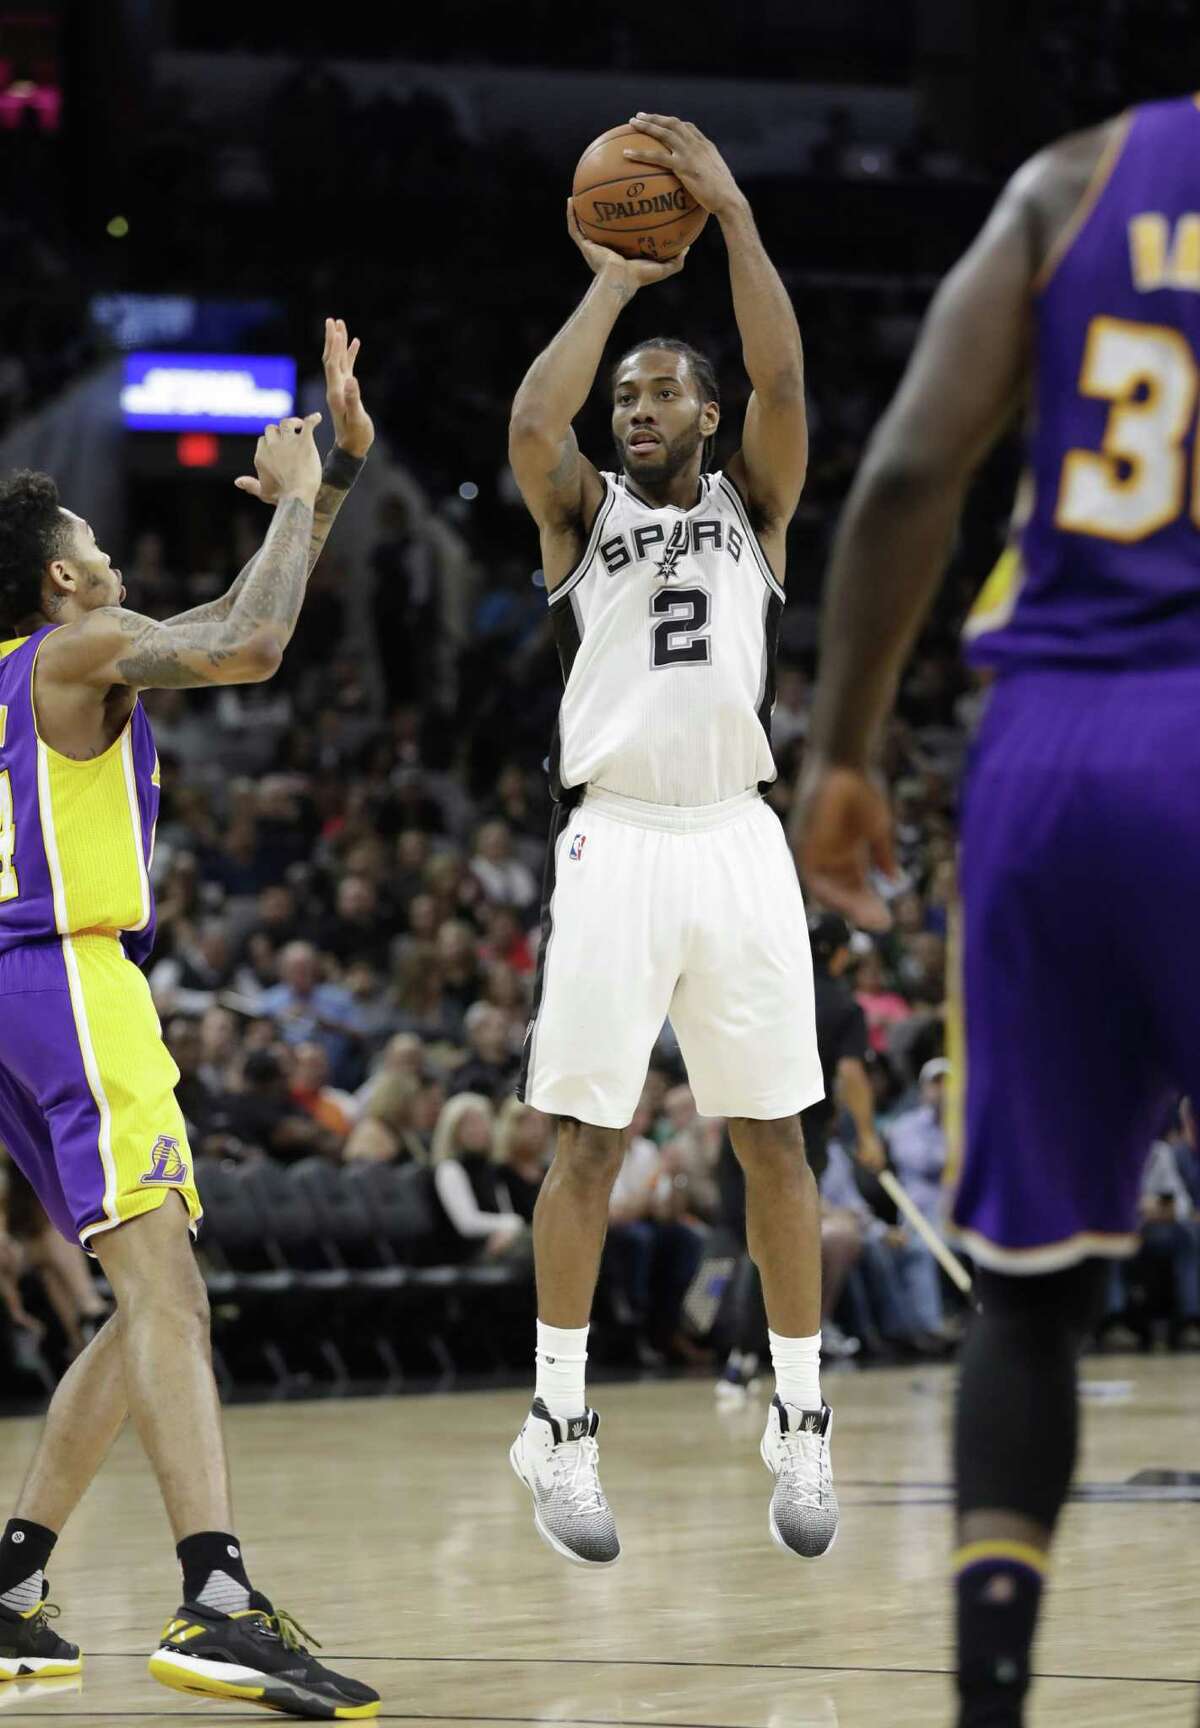 Kawhi Leonard has eclipsed 30 points in three consecutive games and has scored in double figures in 72 in a row.